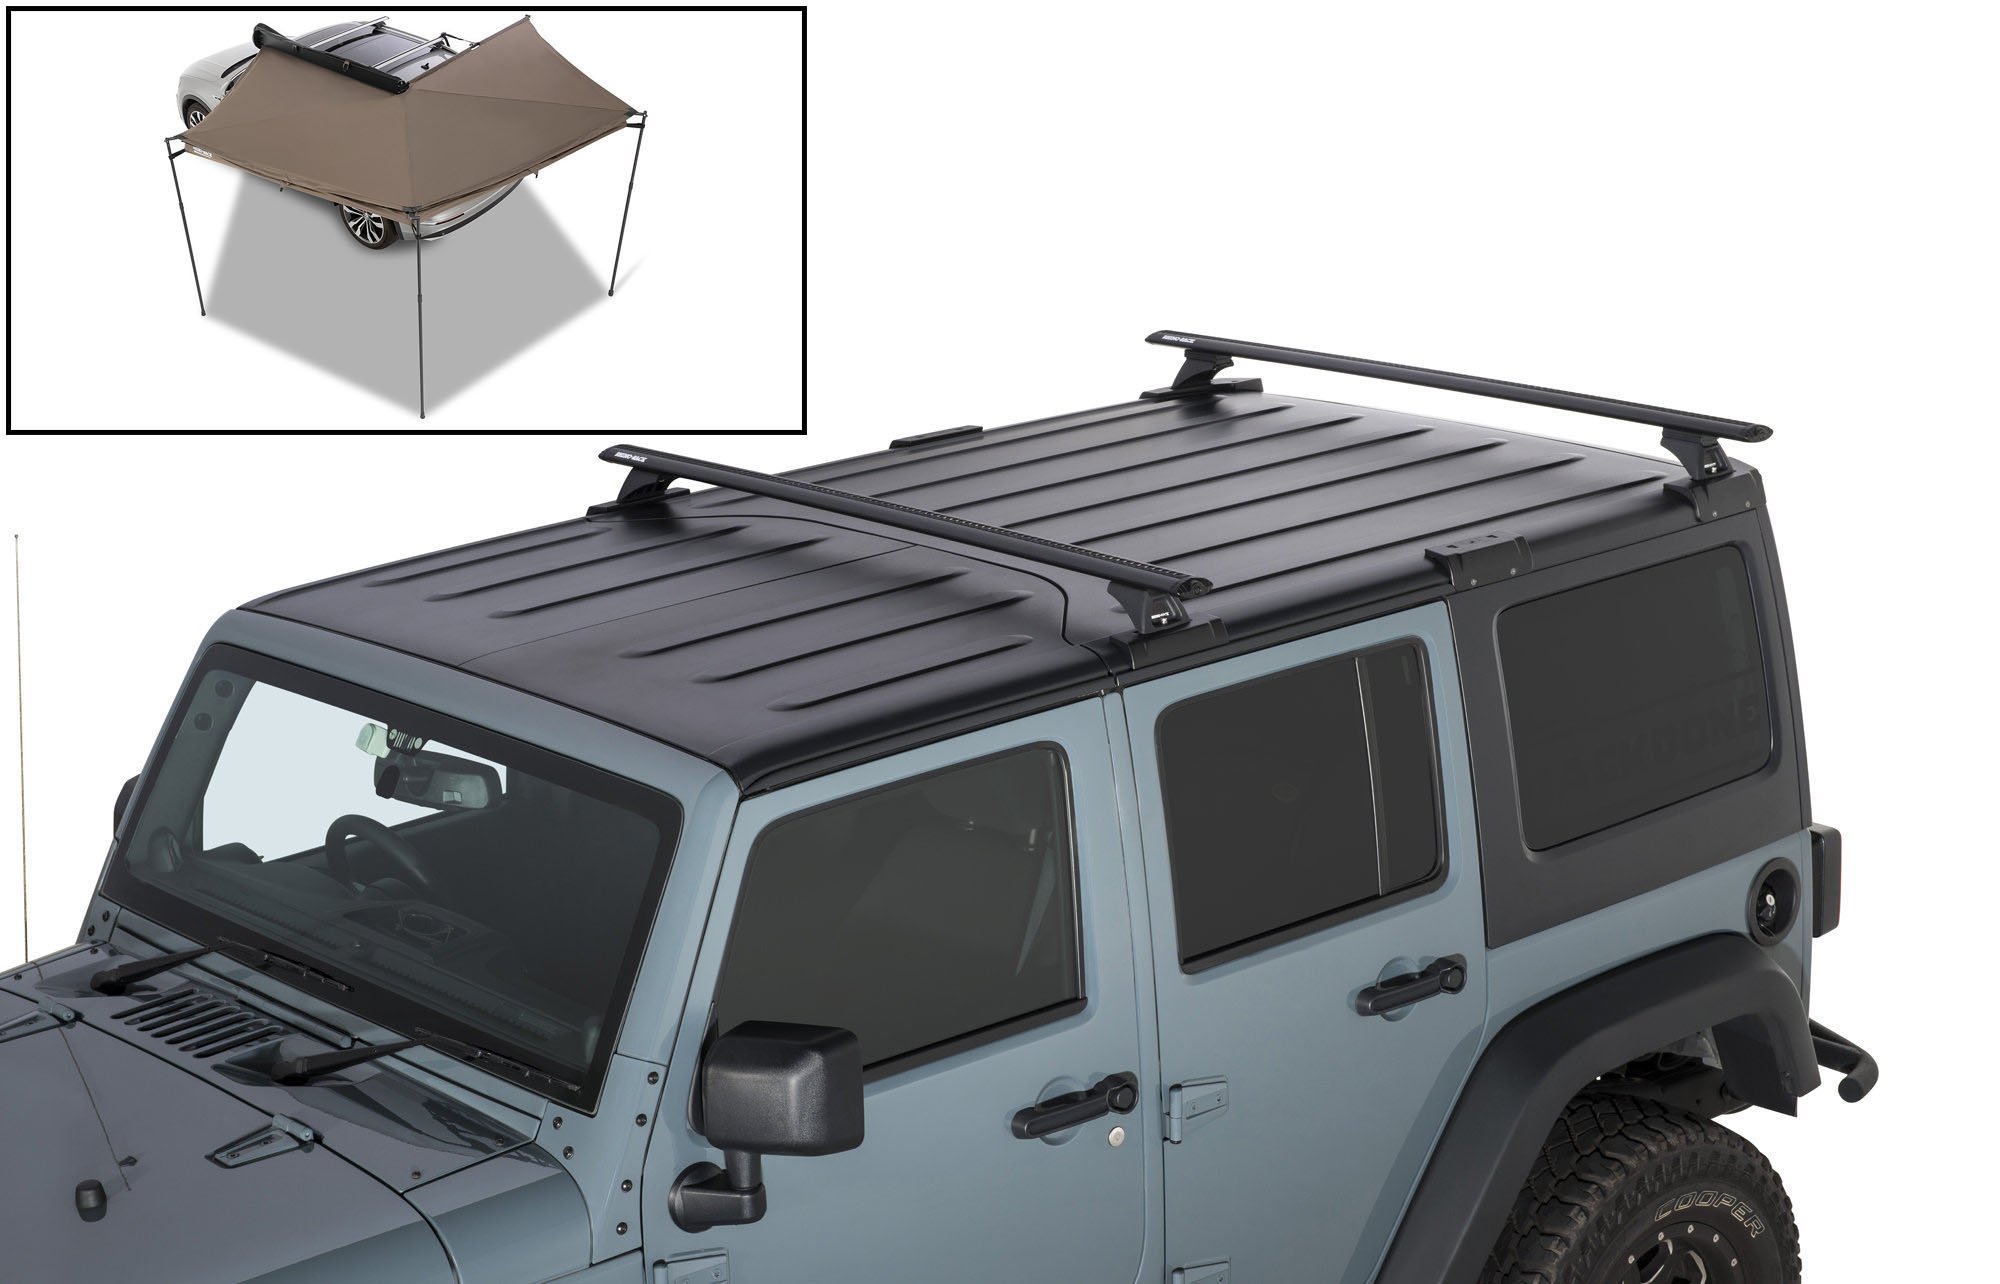 Jeep Wrangler Unlimited Roof Rack Hotsell, SAVE 58%.